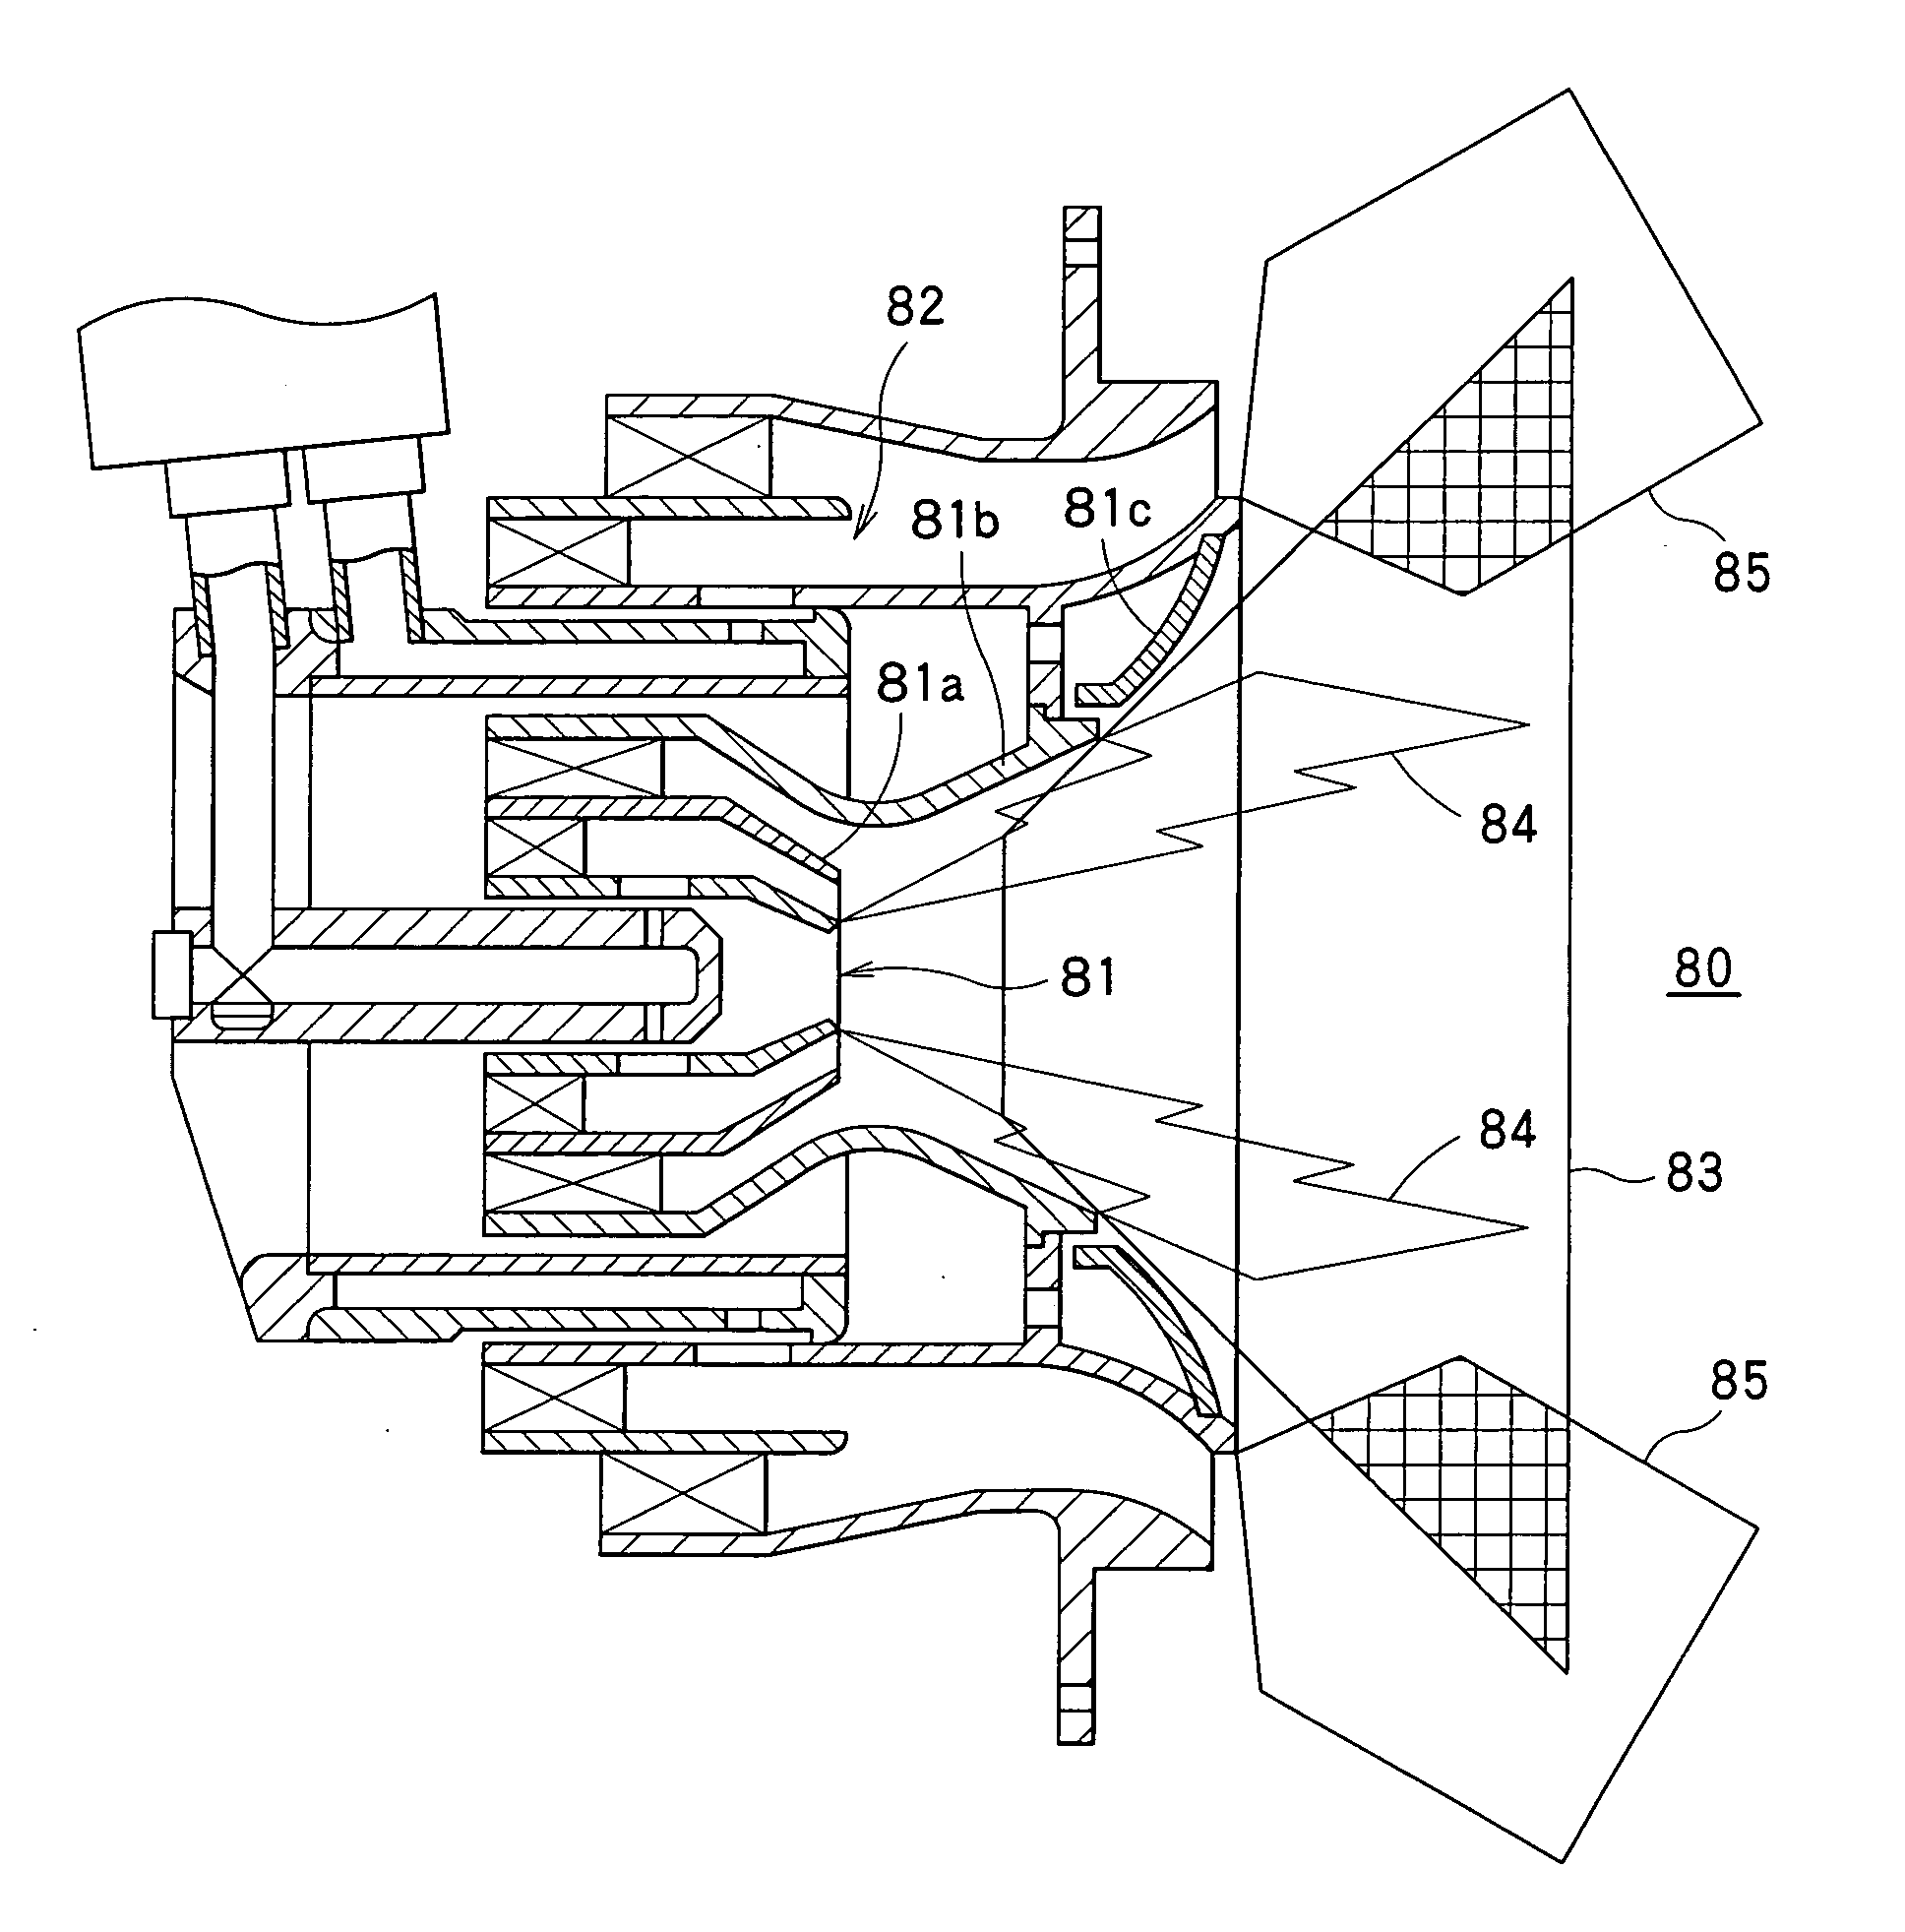 Combustor of a gas turbine engine